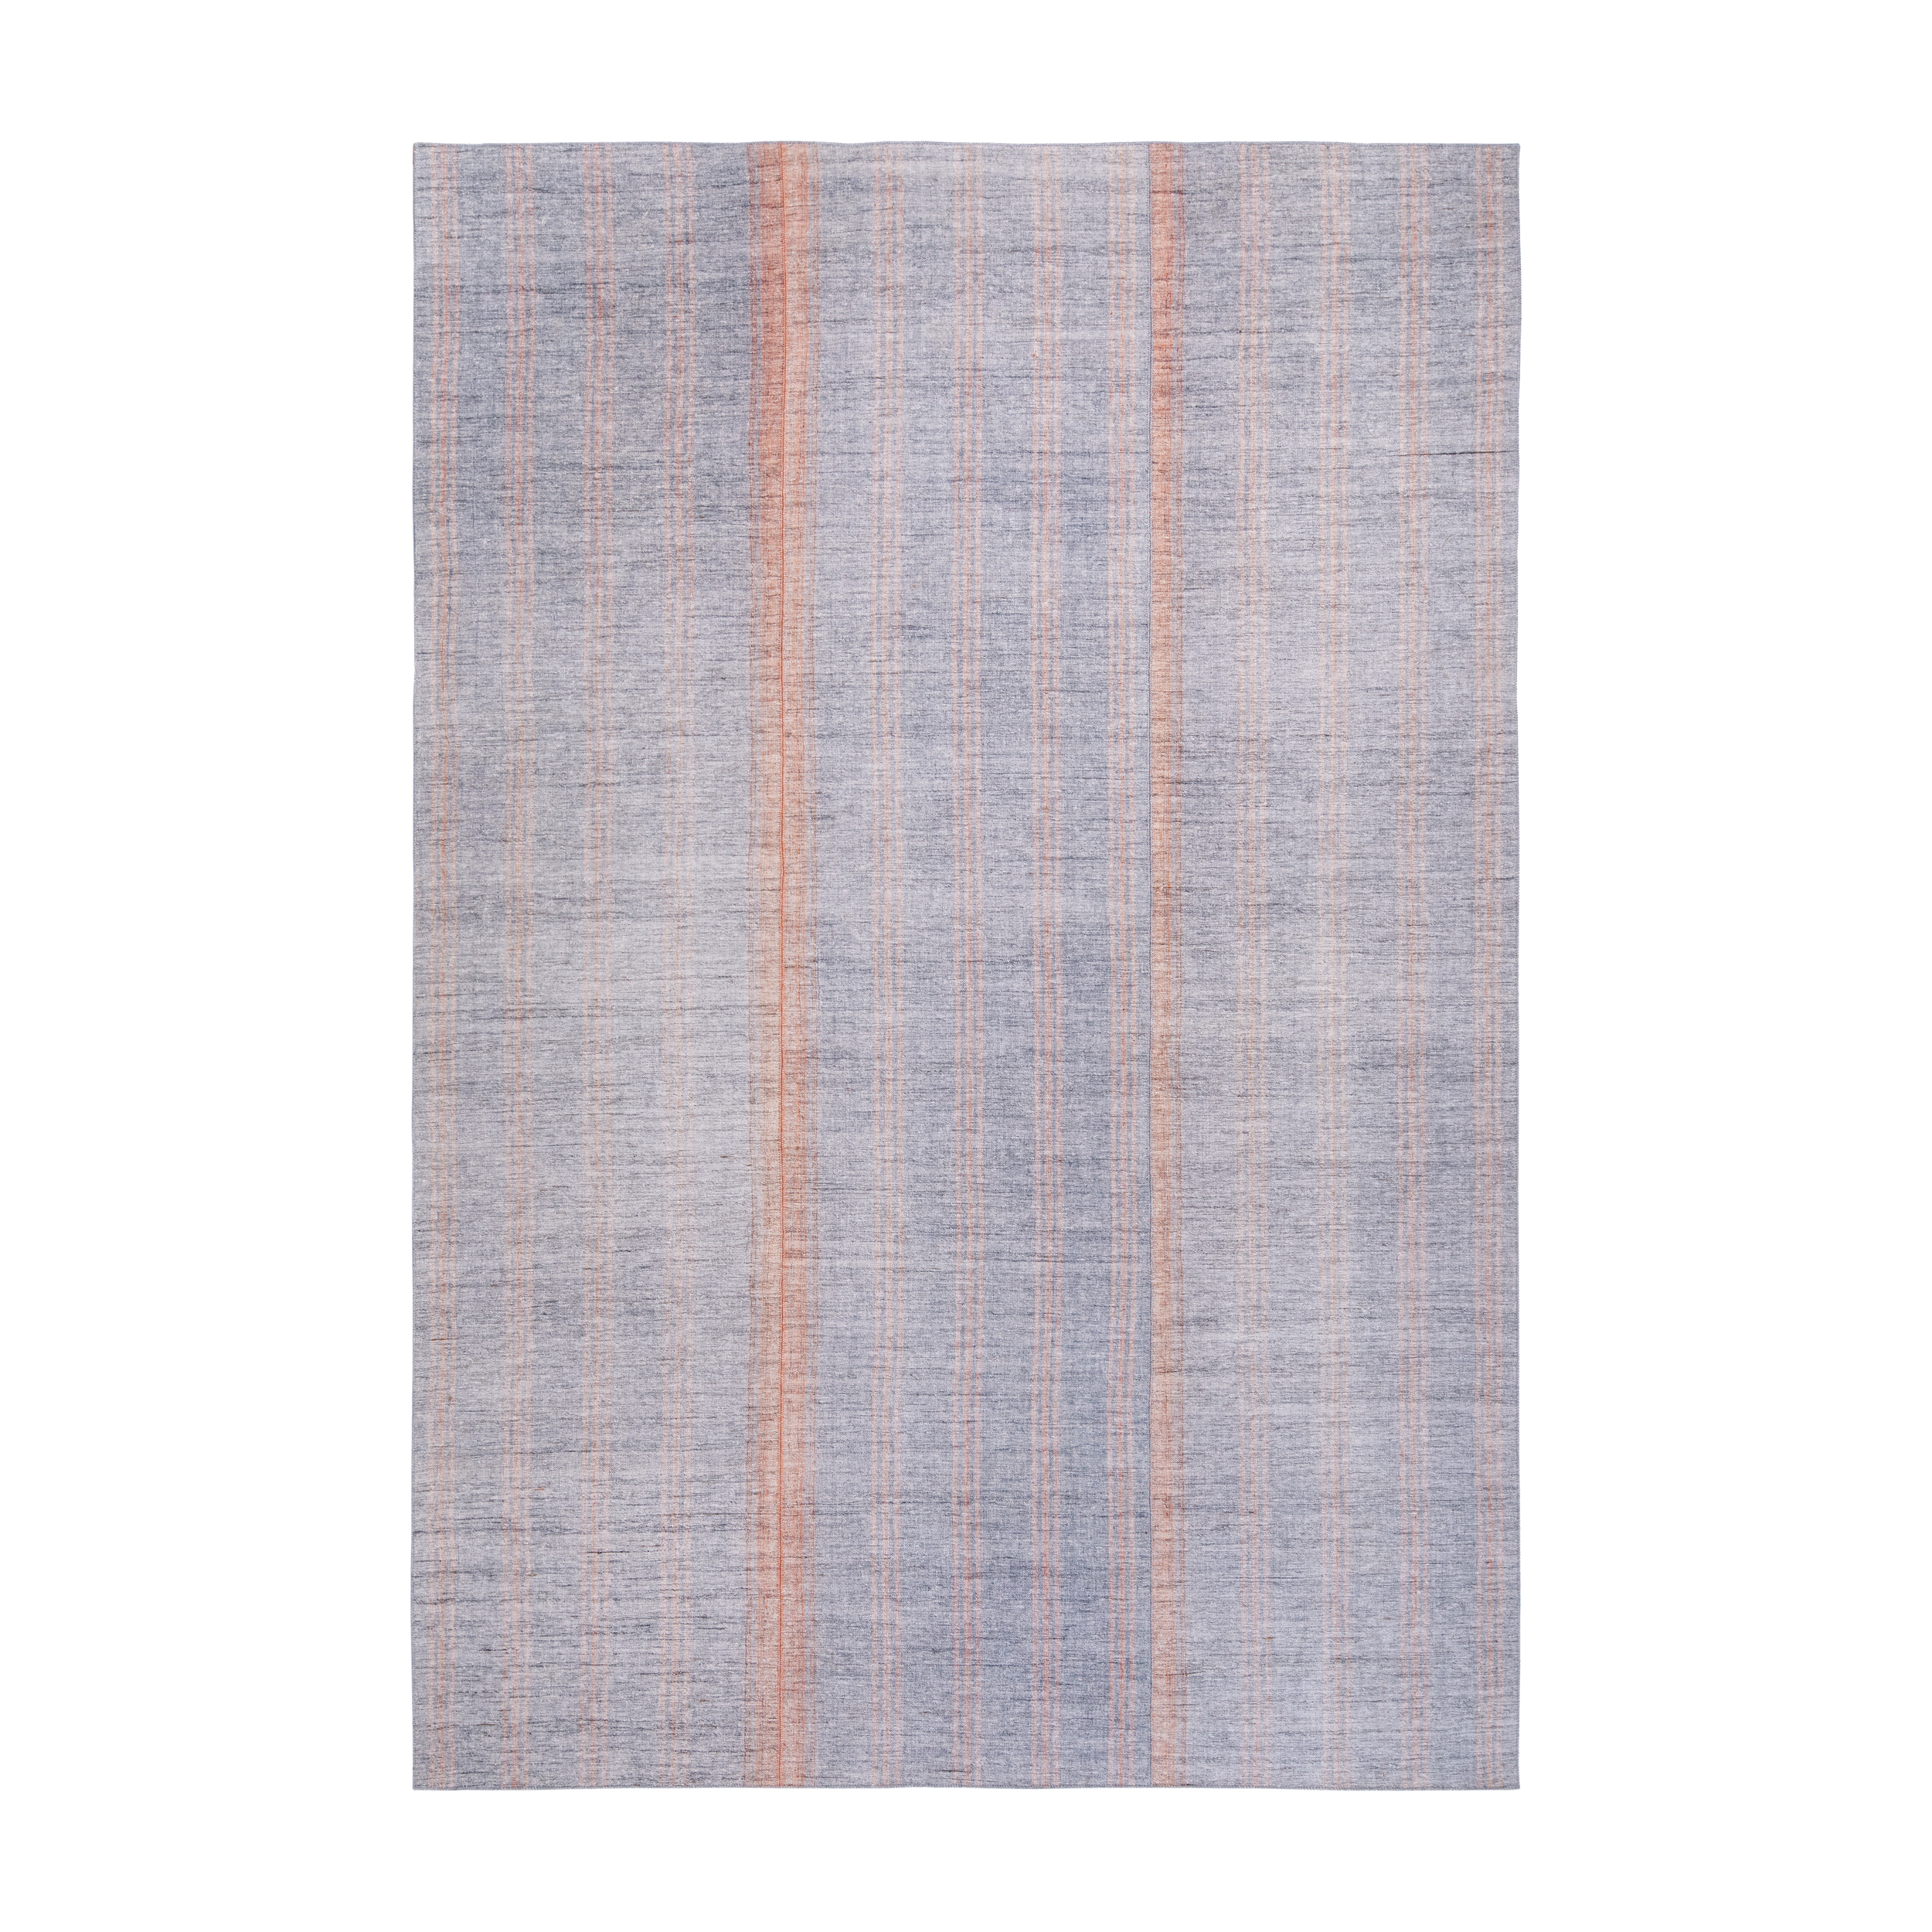 Vintage Santiago rug is a stunning flatweave made with handspun wool and cotton.  